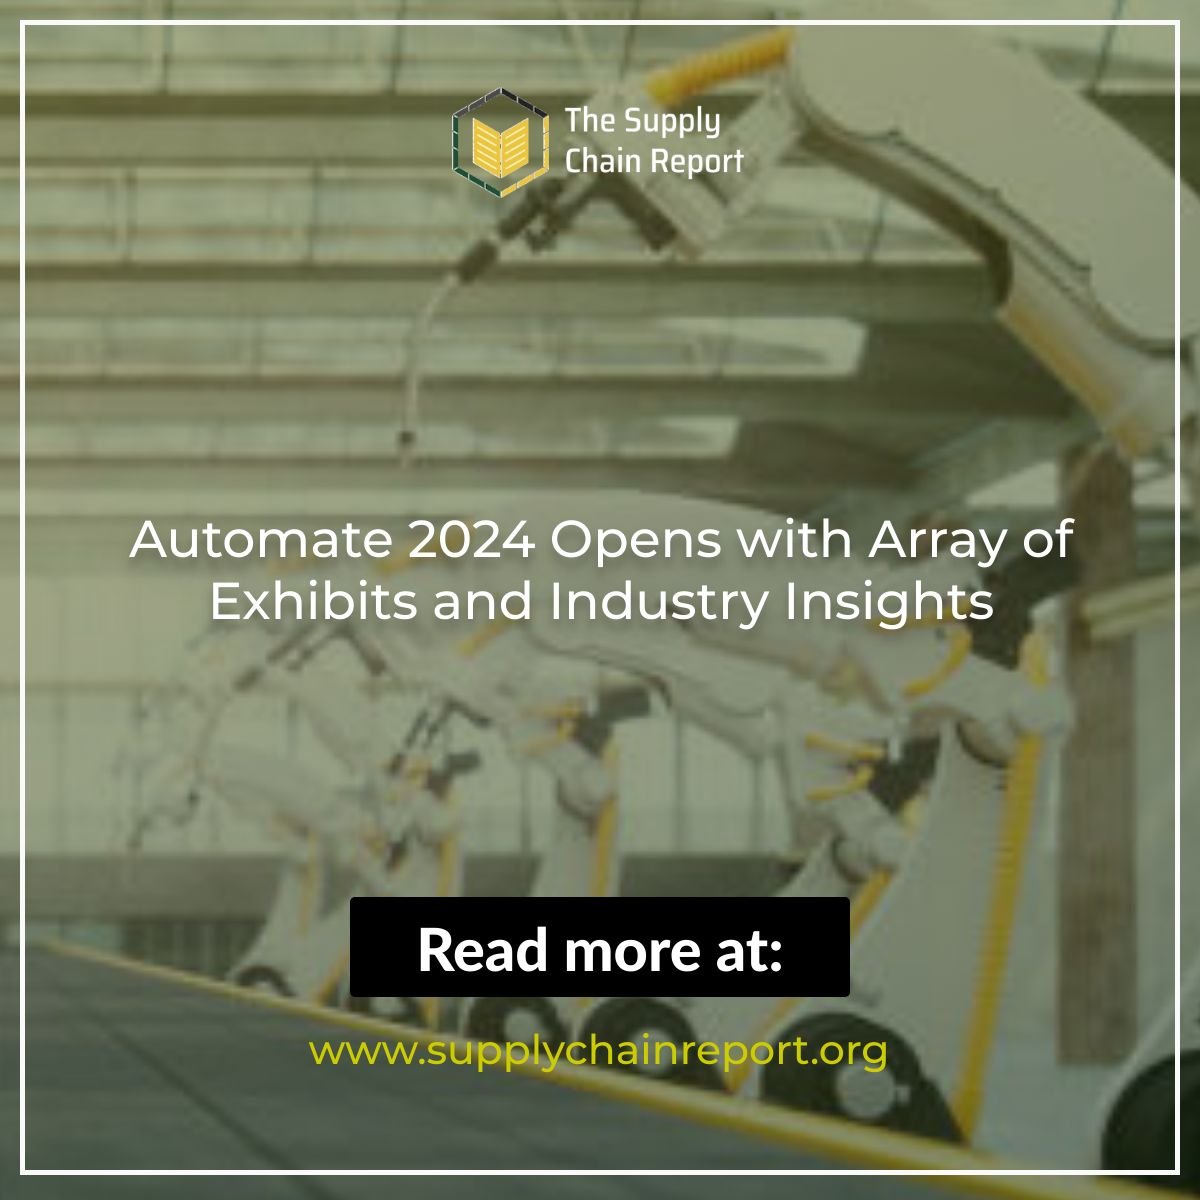 Automate 2024 Opens with Array of Exhibits and Industry Insights
Read more here: supplychainreport.org/automate-2024
#Automate2024#IndustryInsights#AutomationRevolution#RoboticsExpo#SupplyChainNews